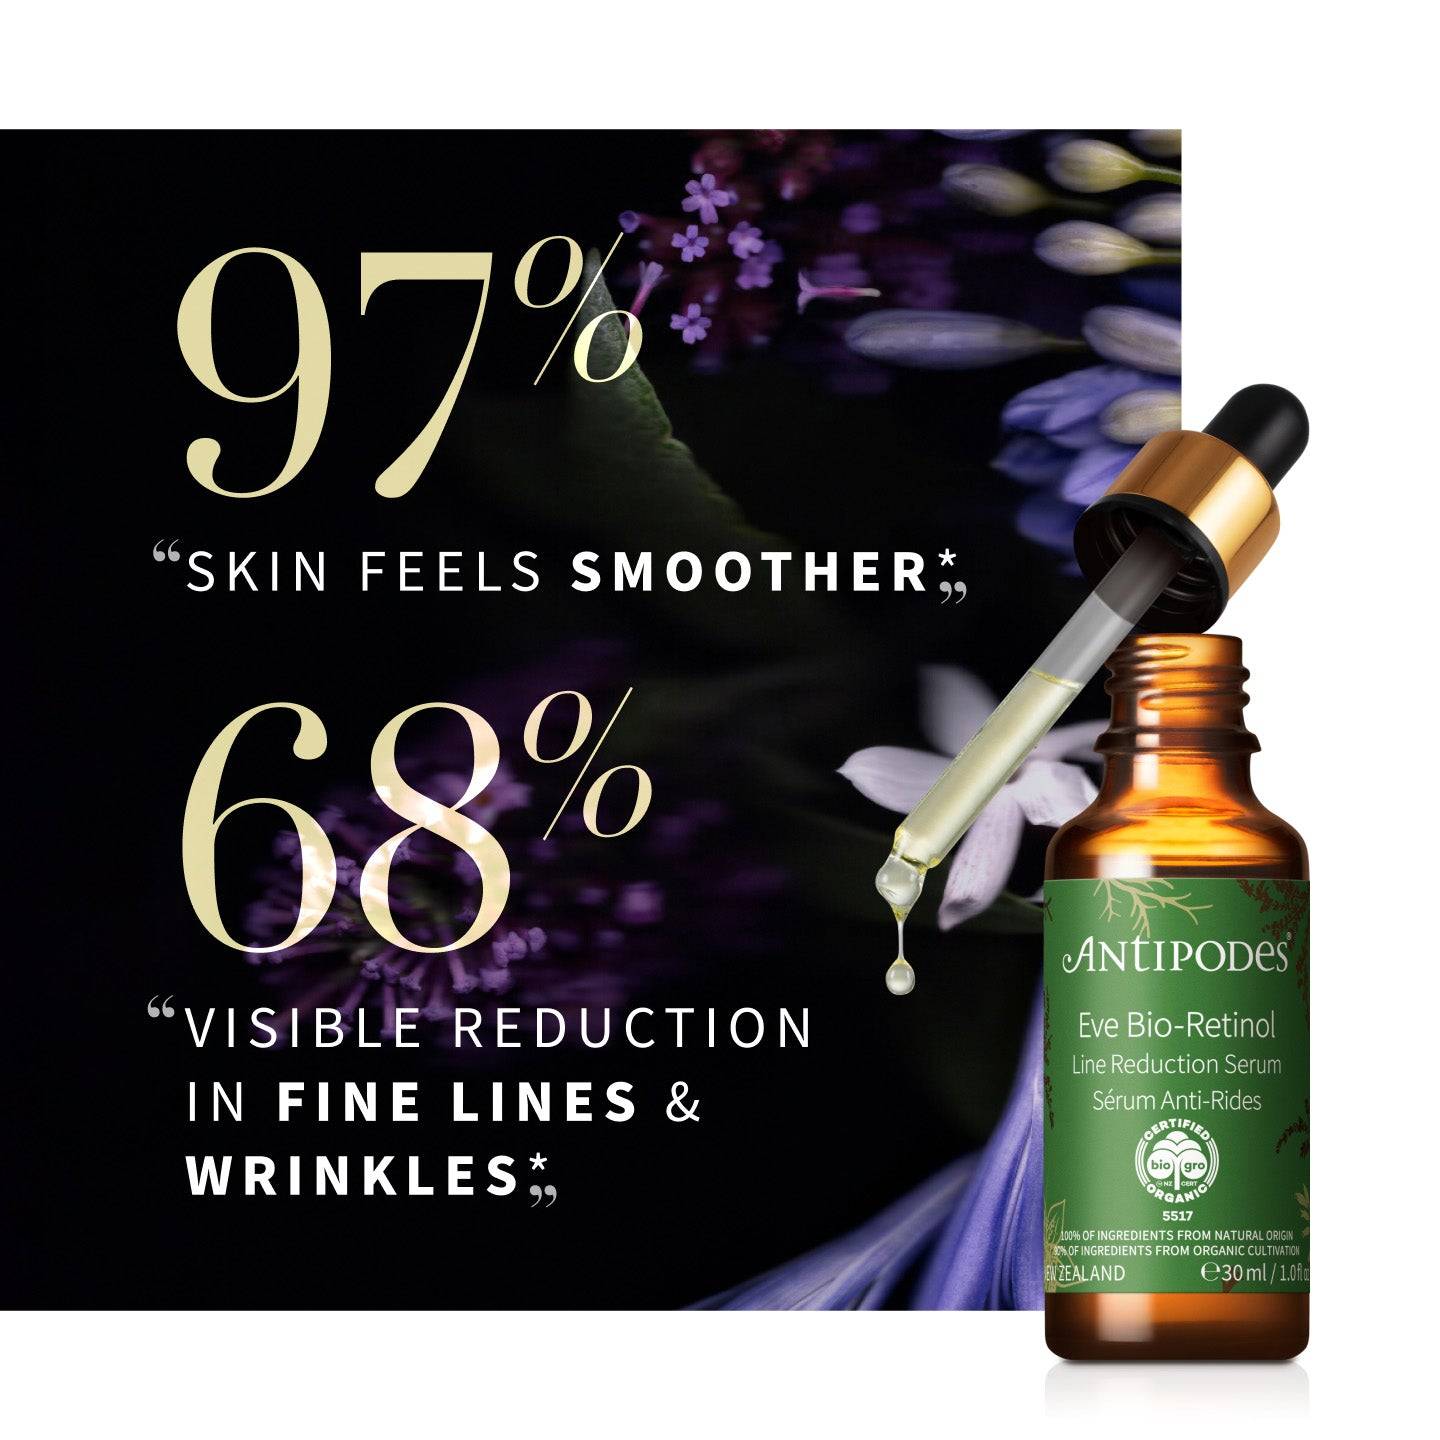 97% “skin feels smoother”* 68% “visible reduction in fine lines and wrinkles”*.